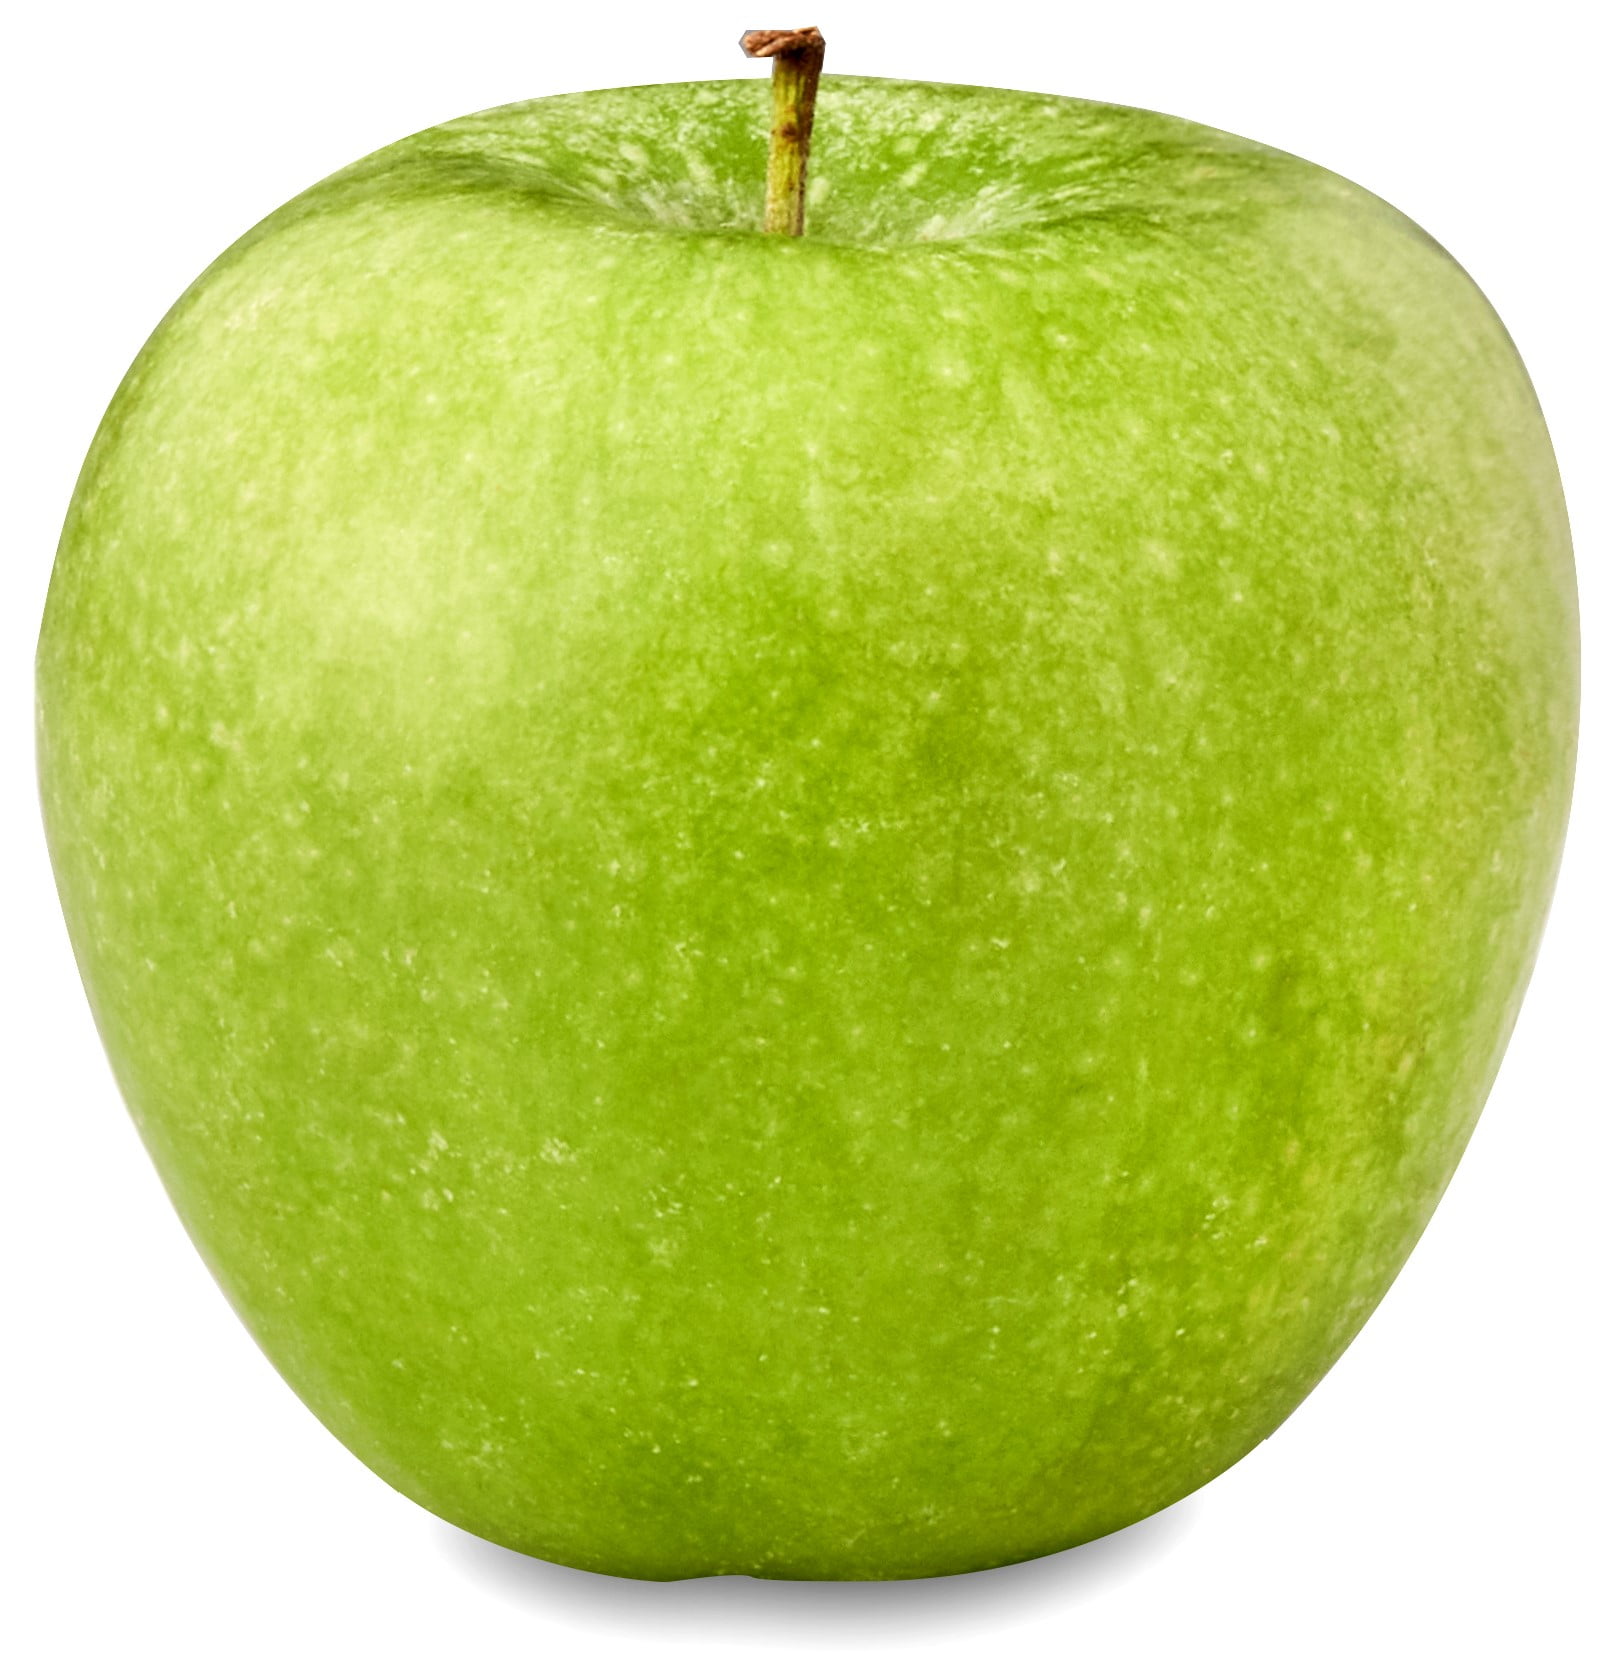 Small Granny Smith Apple - Each, Small/ 1 Count - Kroger